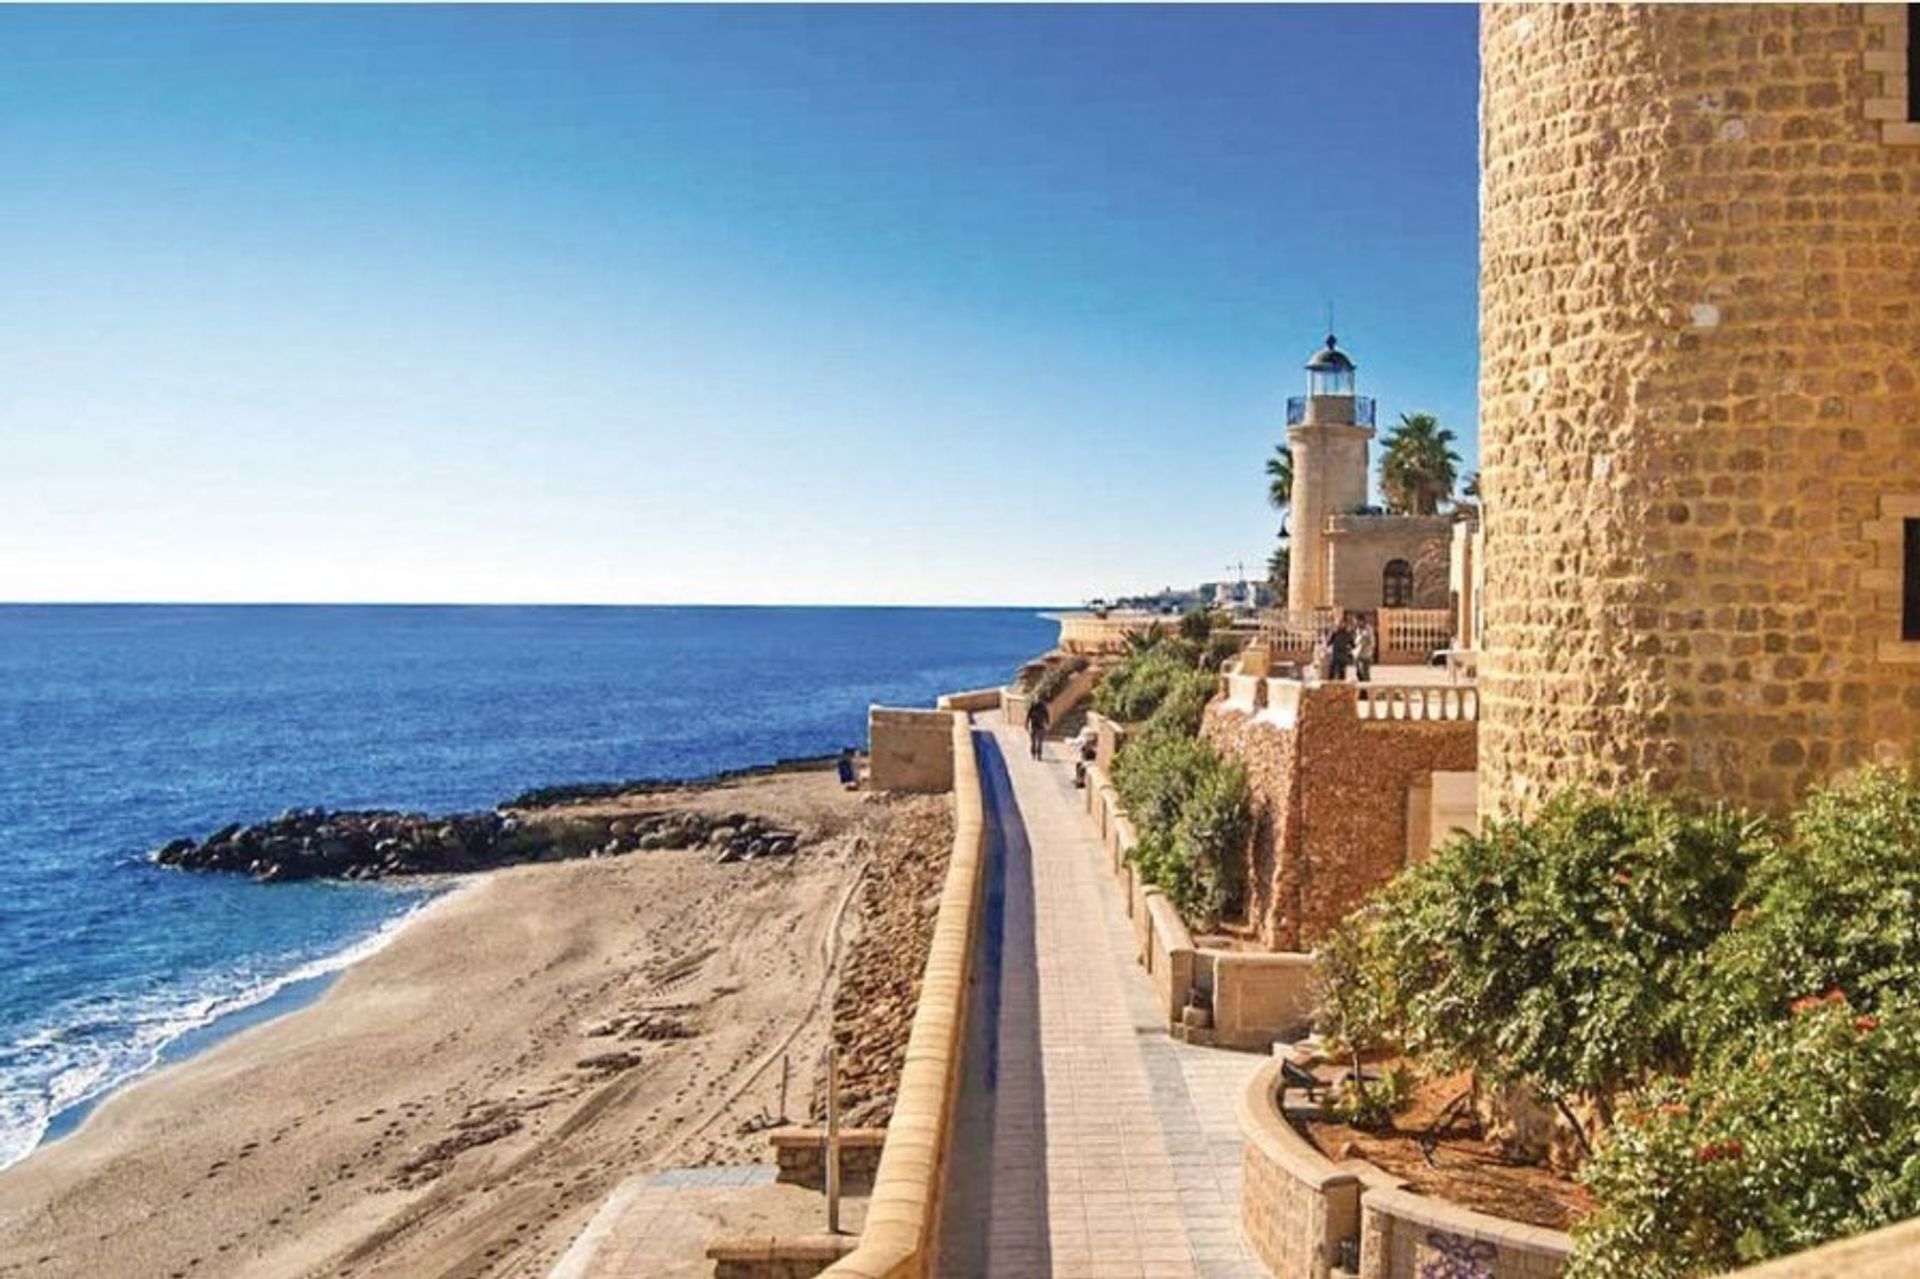 Visit the art museum or enjoy the sweeping views of the Mediterranean from 16th century Santa Ana Castle